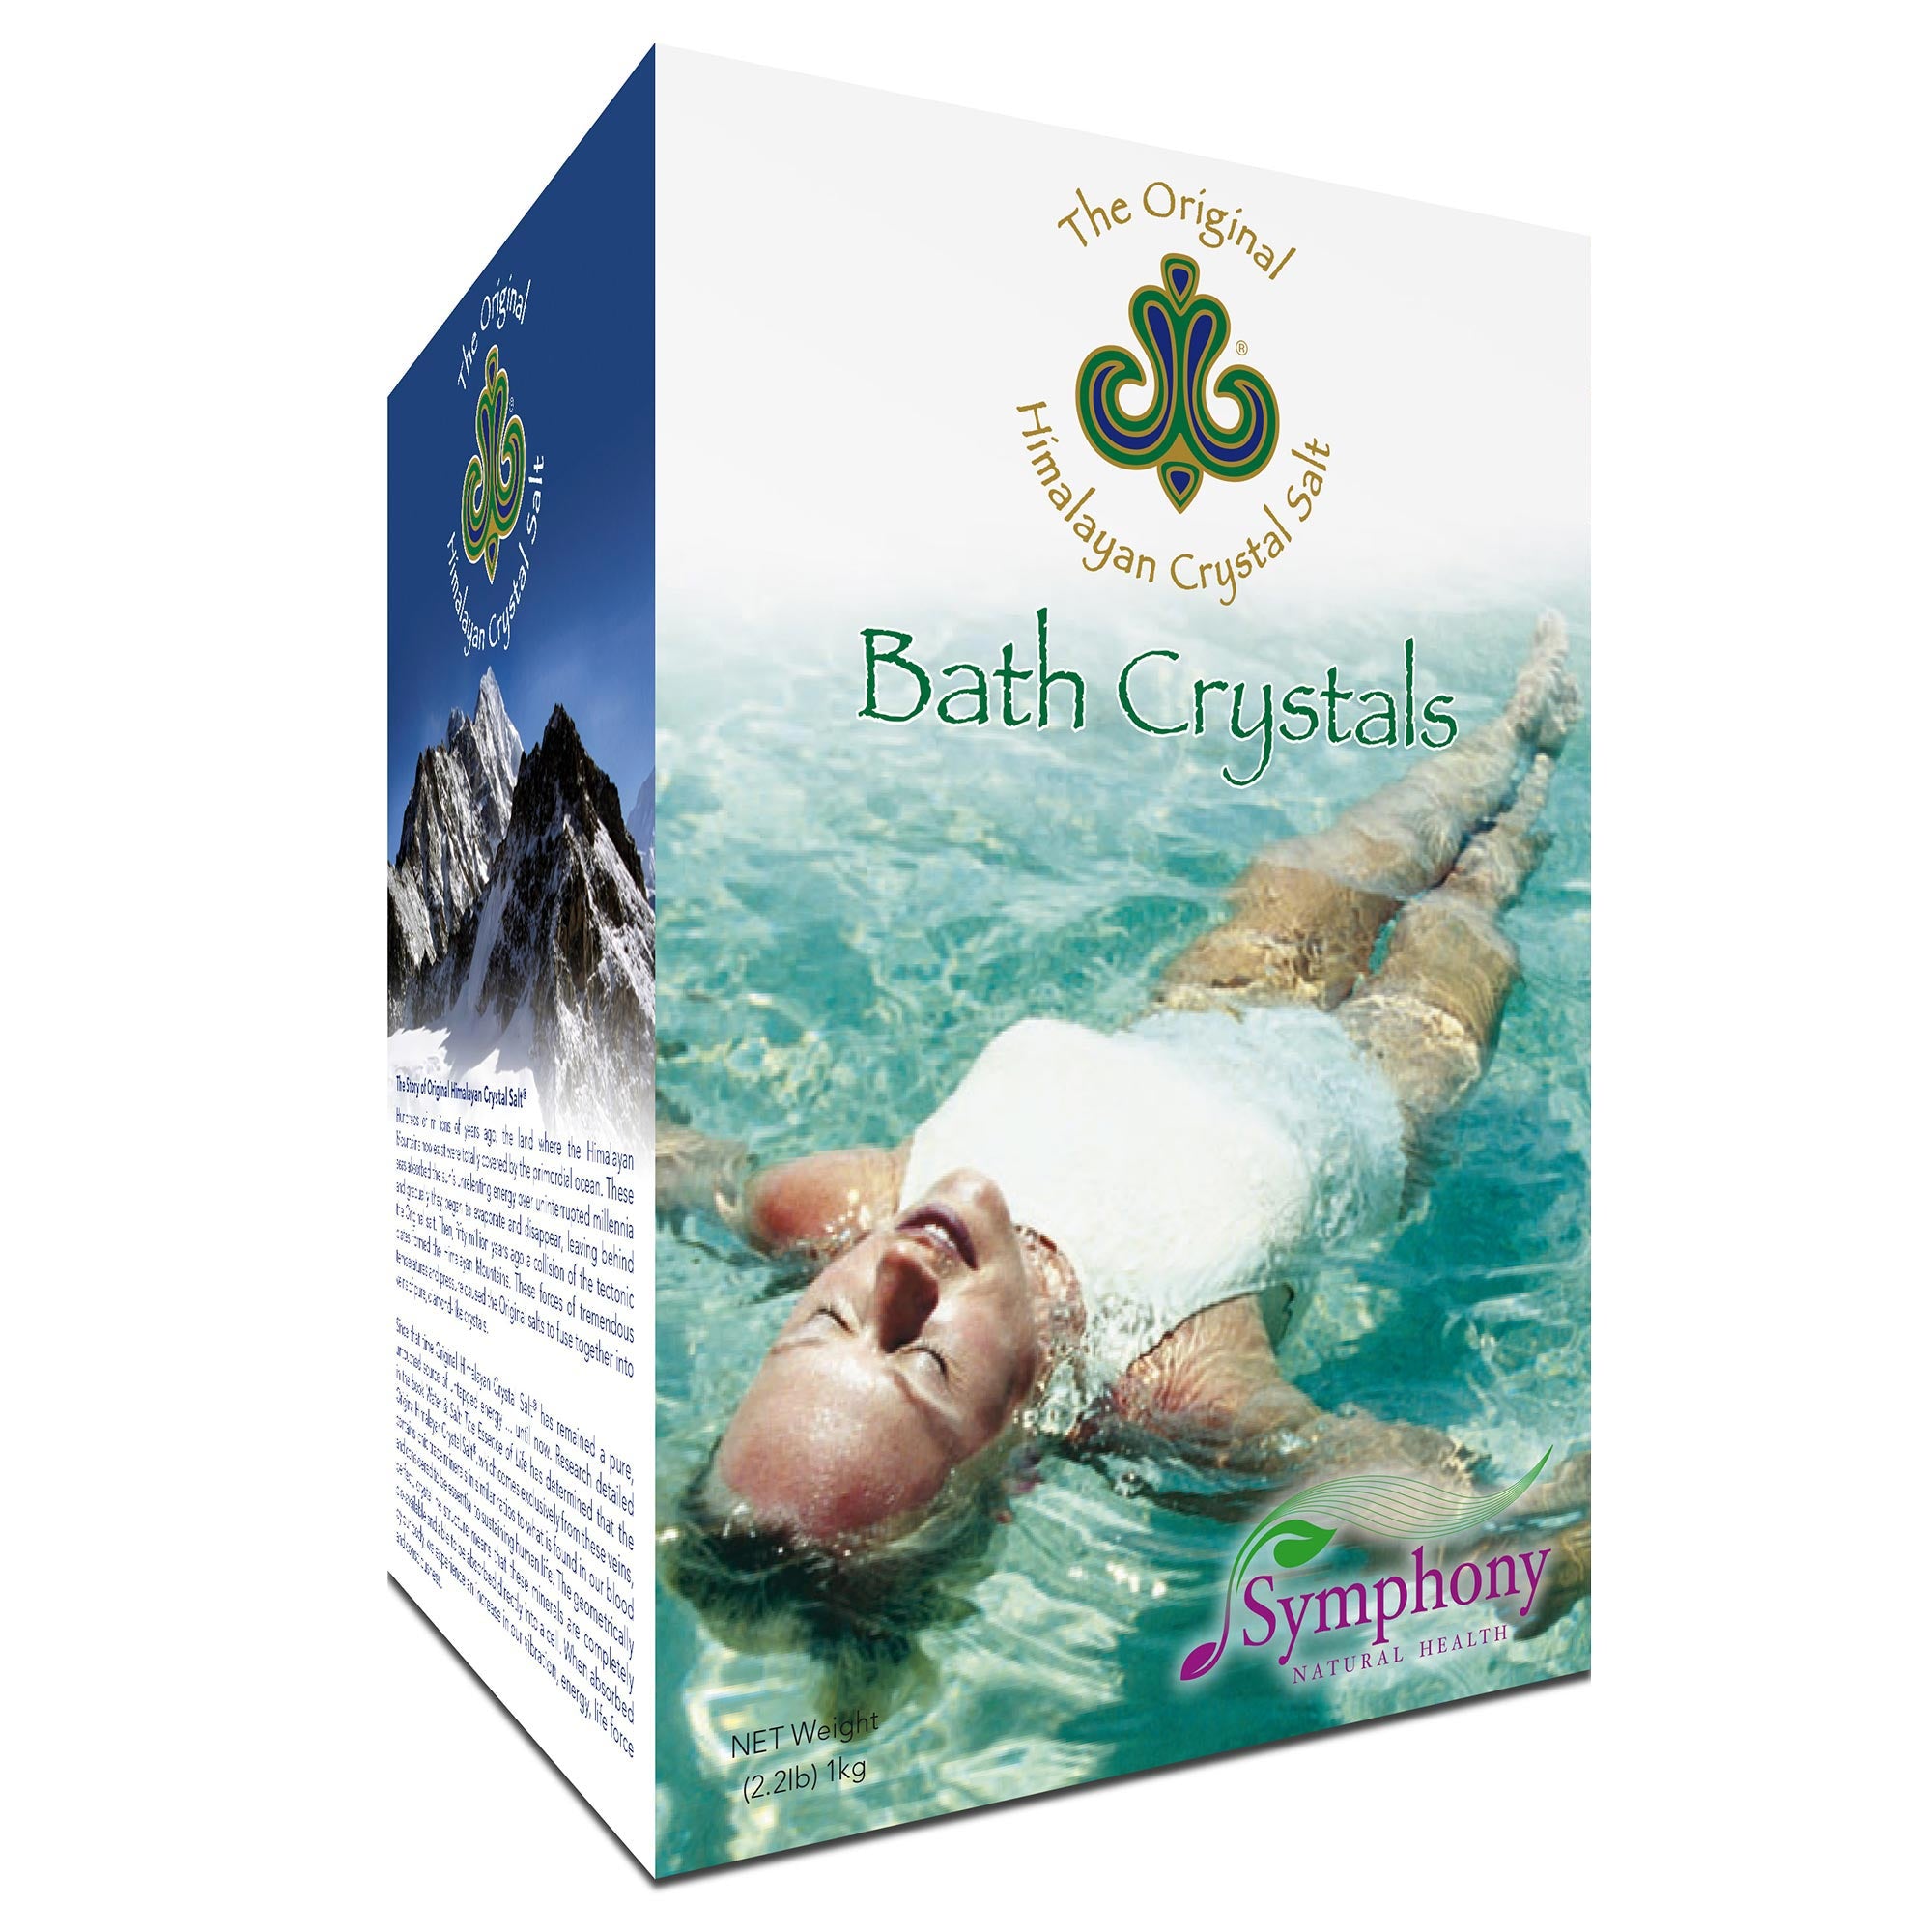 Bath Crystals right-facing product box shows white woman in white swimsuit face up in pool with arms stretch out and legs crossed 